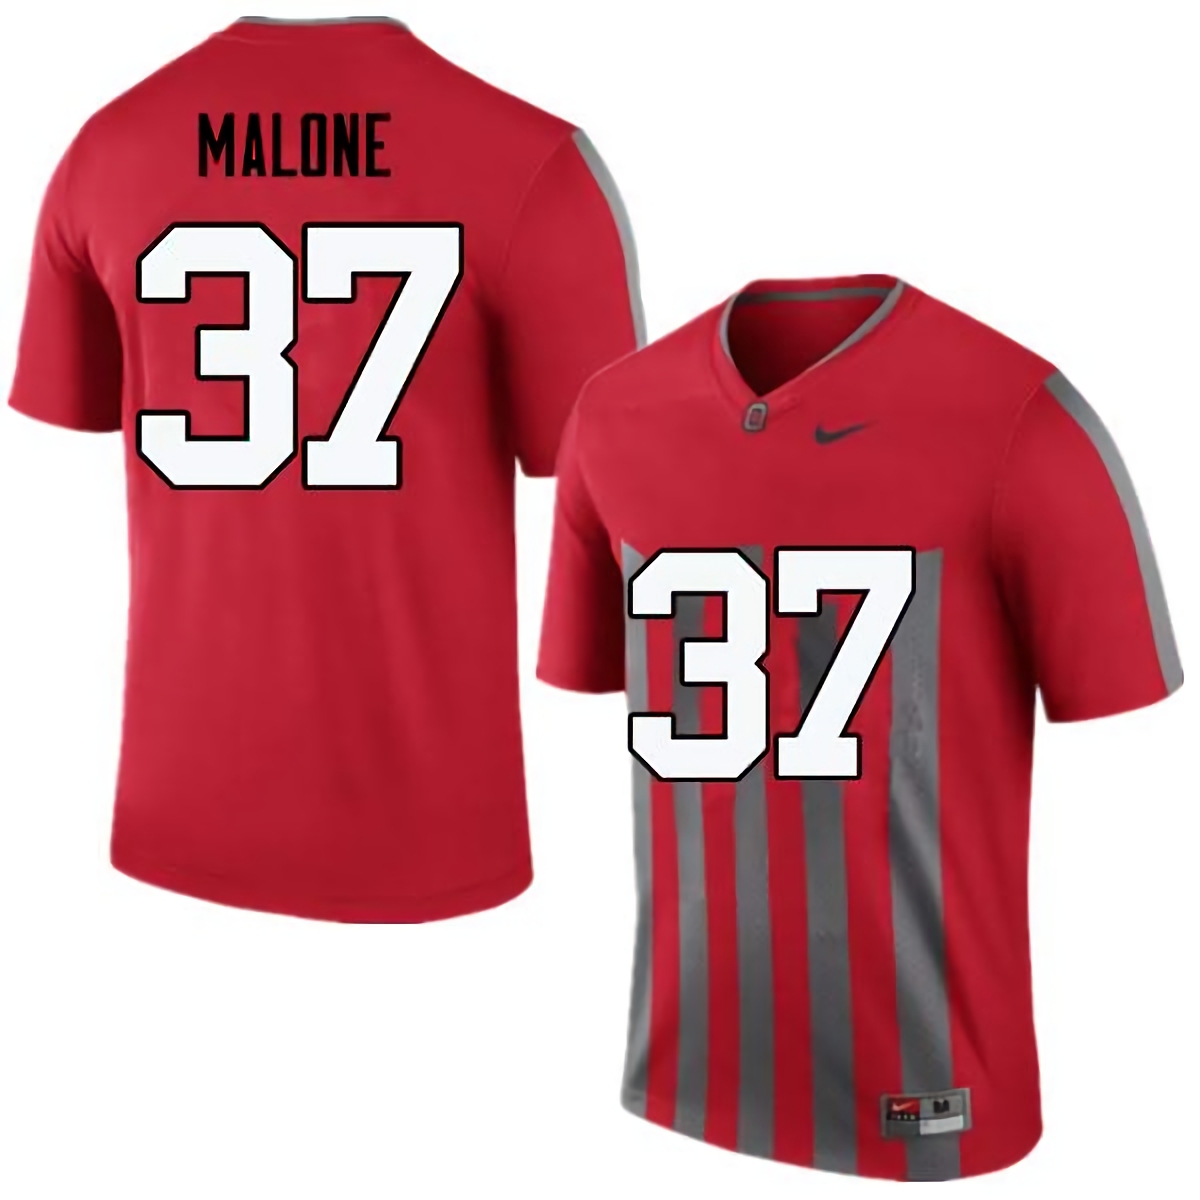 Derrick Malone Ohio State Buckeyes Men's NCAA #37 Nike Throwback Red College Stitched Football Jersey HRI5156IW